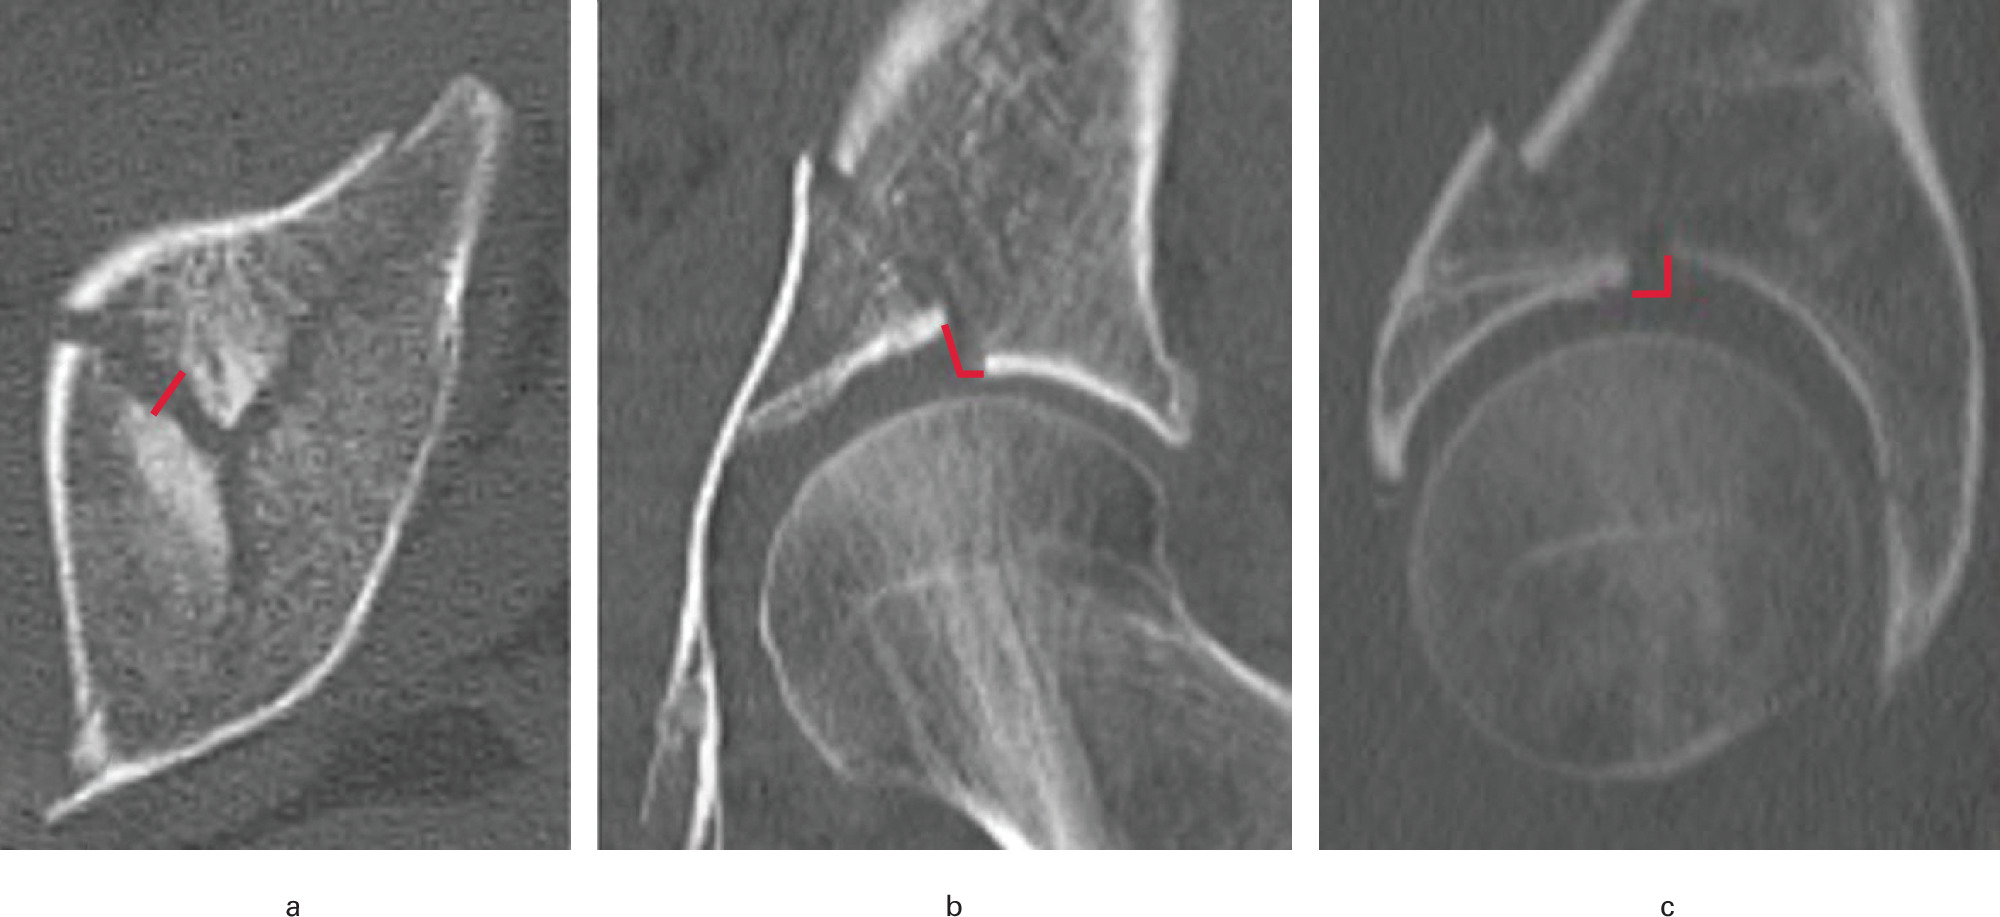 Fig. 1 
            Measurements of the acetabular fracture displacement of a 68-year-old woman are displayed in the a) axial (gap 4 mm), b) coronal (step-off 4 mm, gap 2 mm), and c) sagittal (step-off 3 mm, gap 3 mm) views.
          